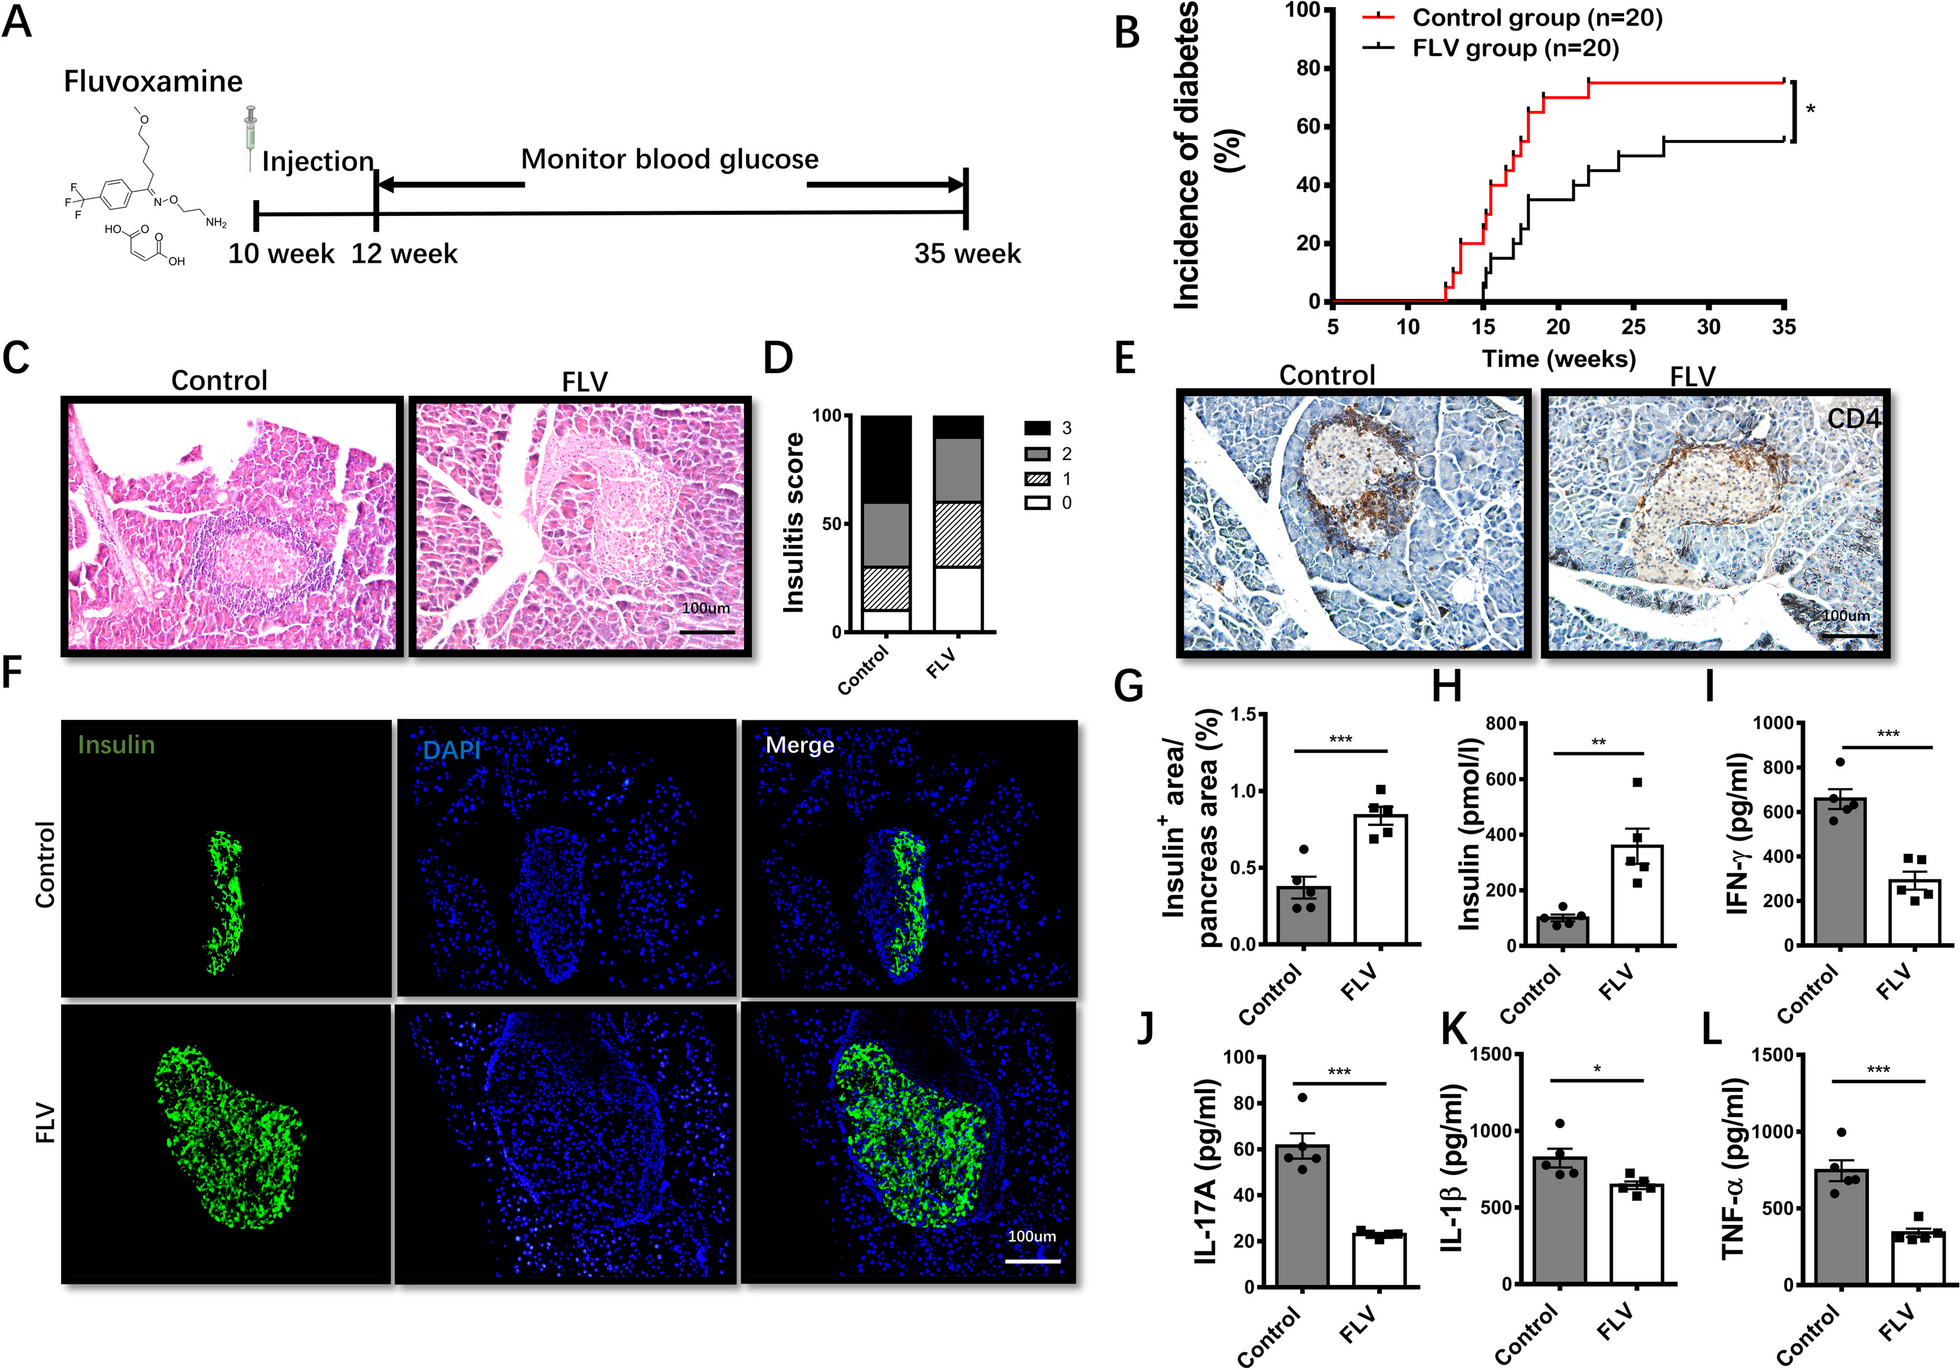 Fluvoxamine inhibits Th1 and Th17 polarization and function by repressing glycolysis to attenuate autoimmune progression in type 1 diabetes